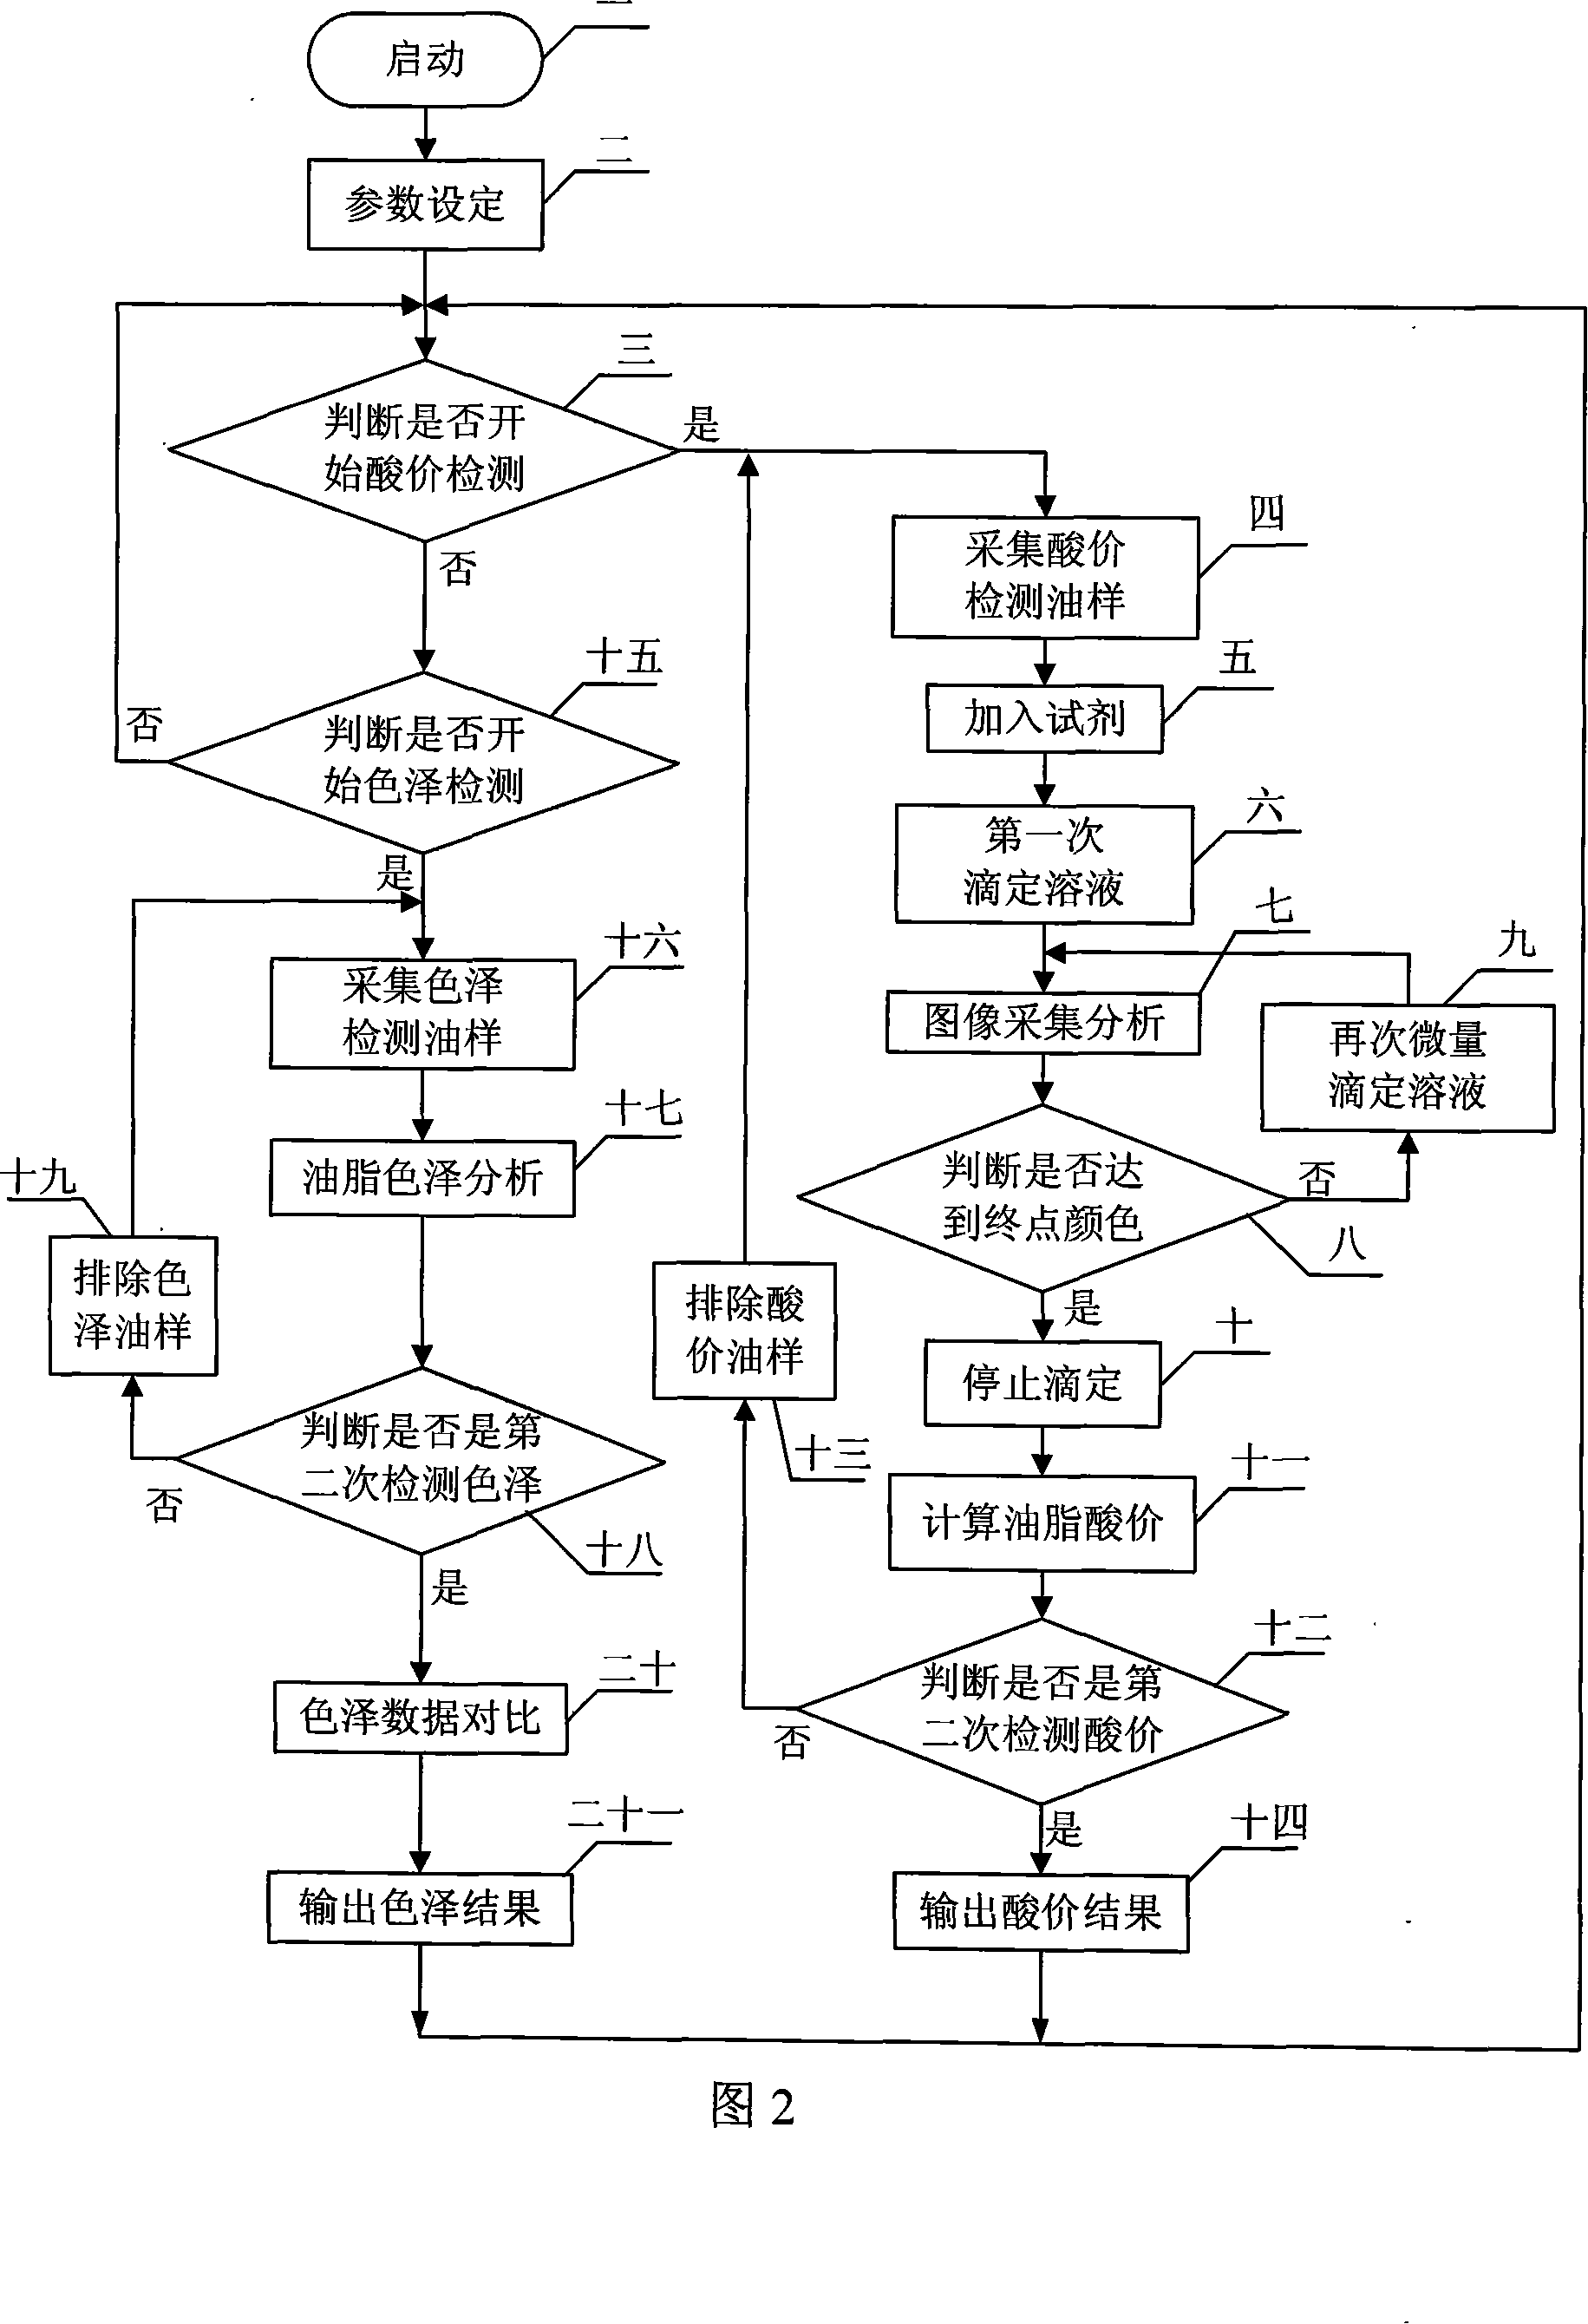 Grease color acid value integral automatic detection device and method based on computer vision